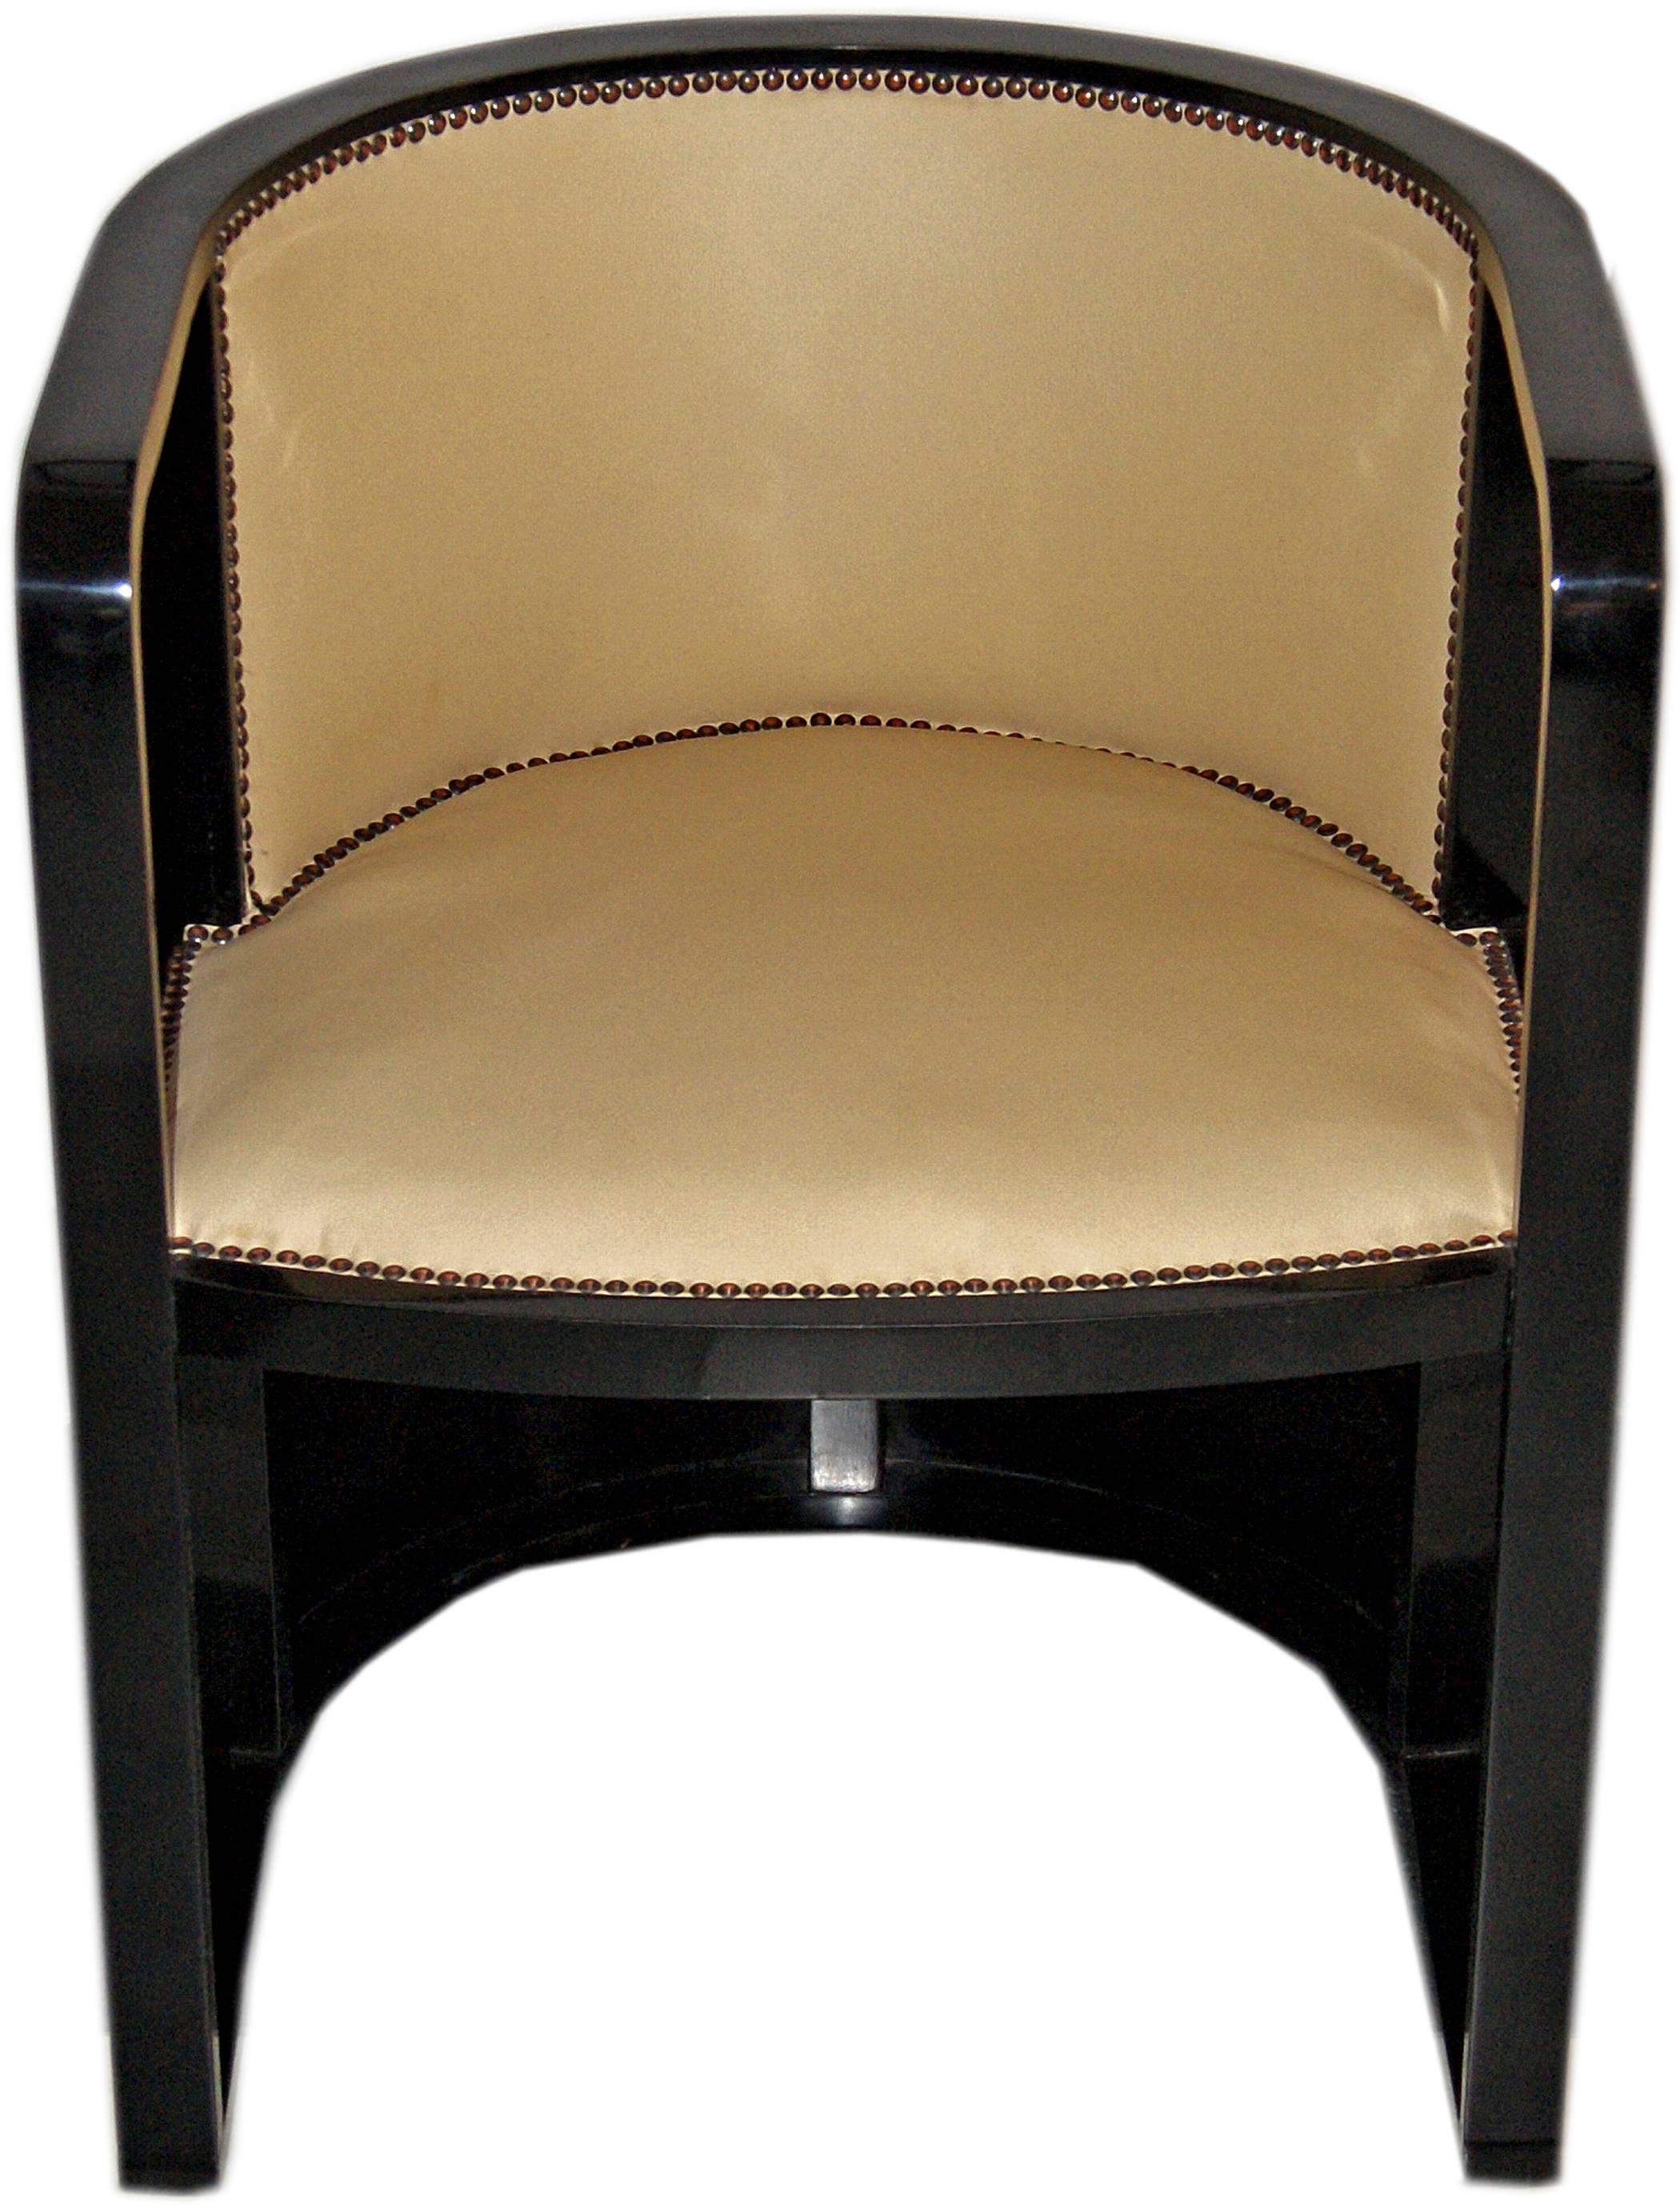 Jacob & Josef Kohn armchair(Model 421)
Design: Josef Hoffmann
Made in Vienna / Austria, Art Nouveau period.
beechwood massive 
black stained 
seat and backrest are covered with cream leather 
made circa 1910-1920

Attention:
Two chairs are